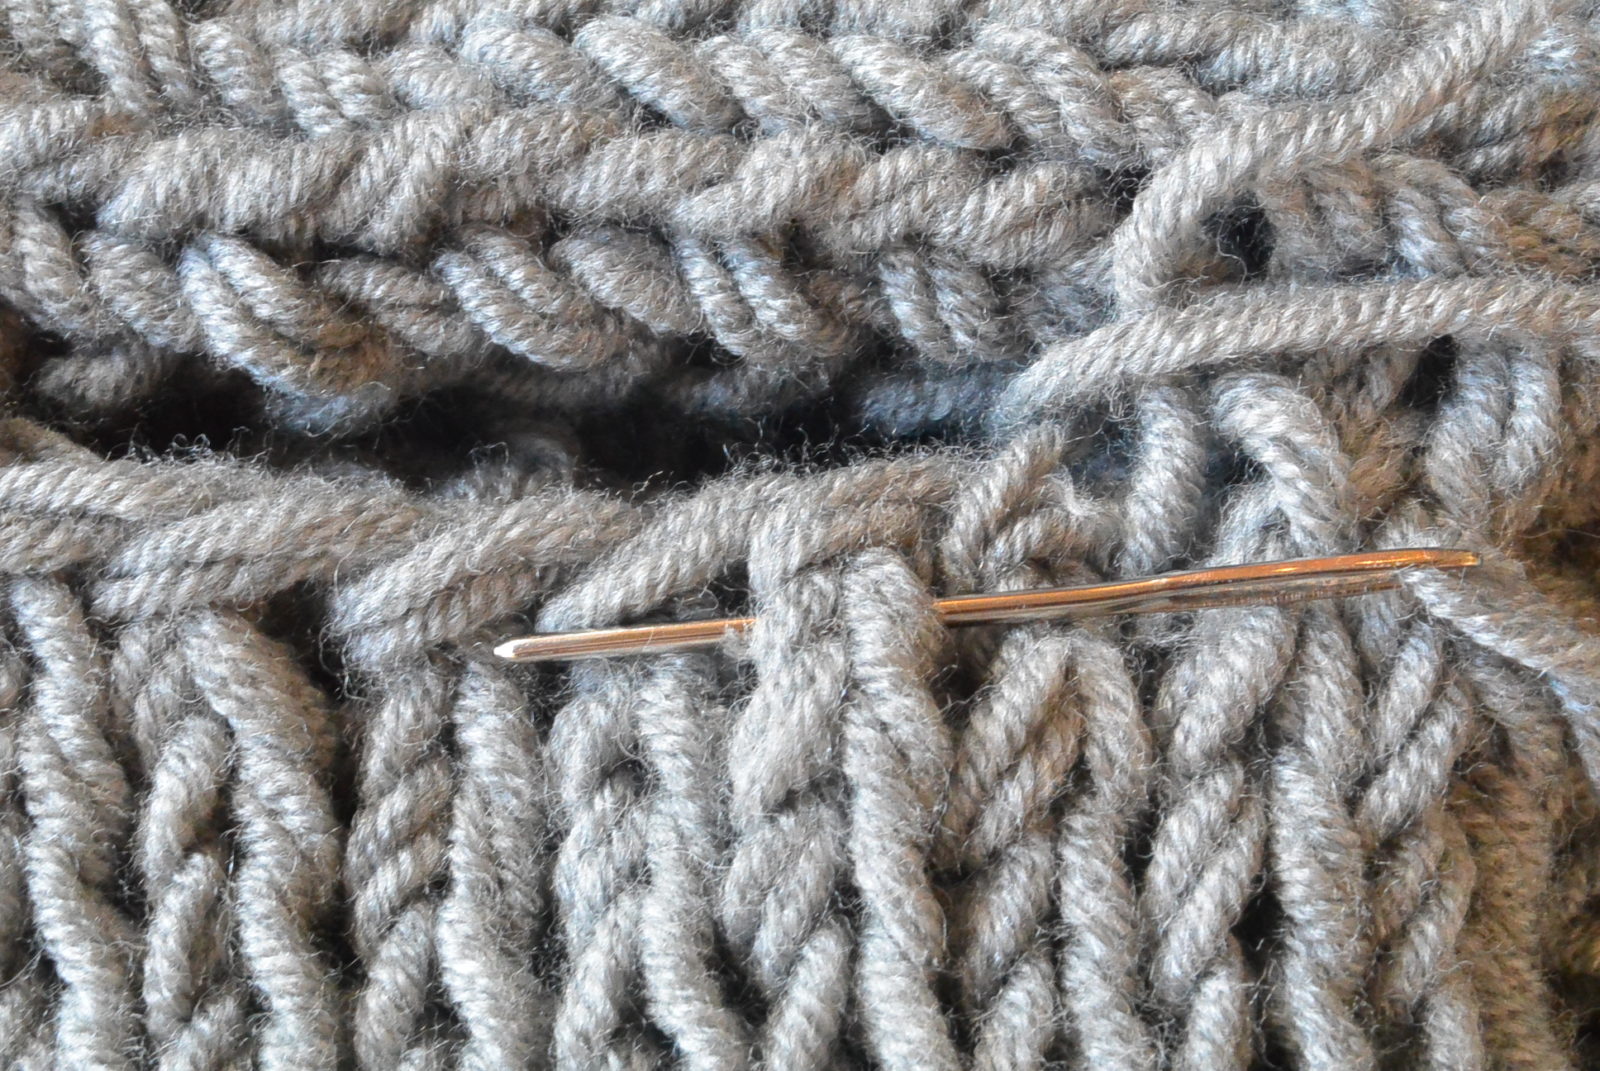 What to knit with chunky yarn